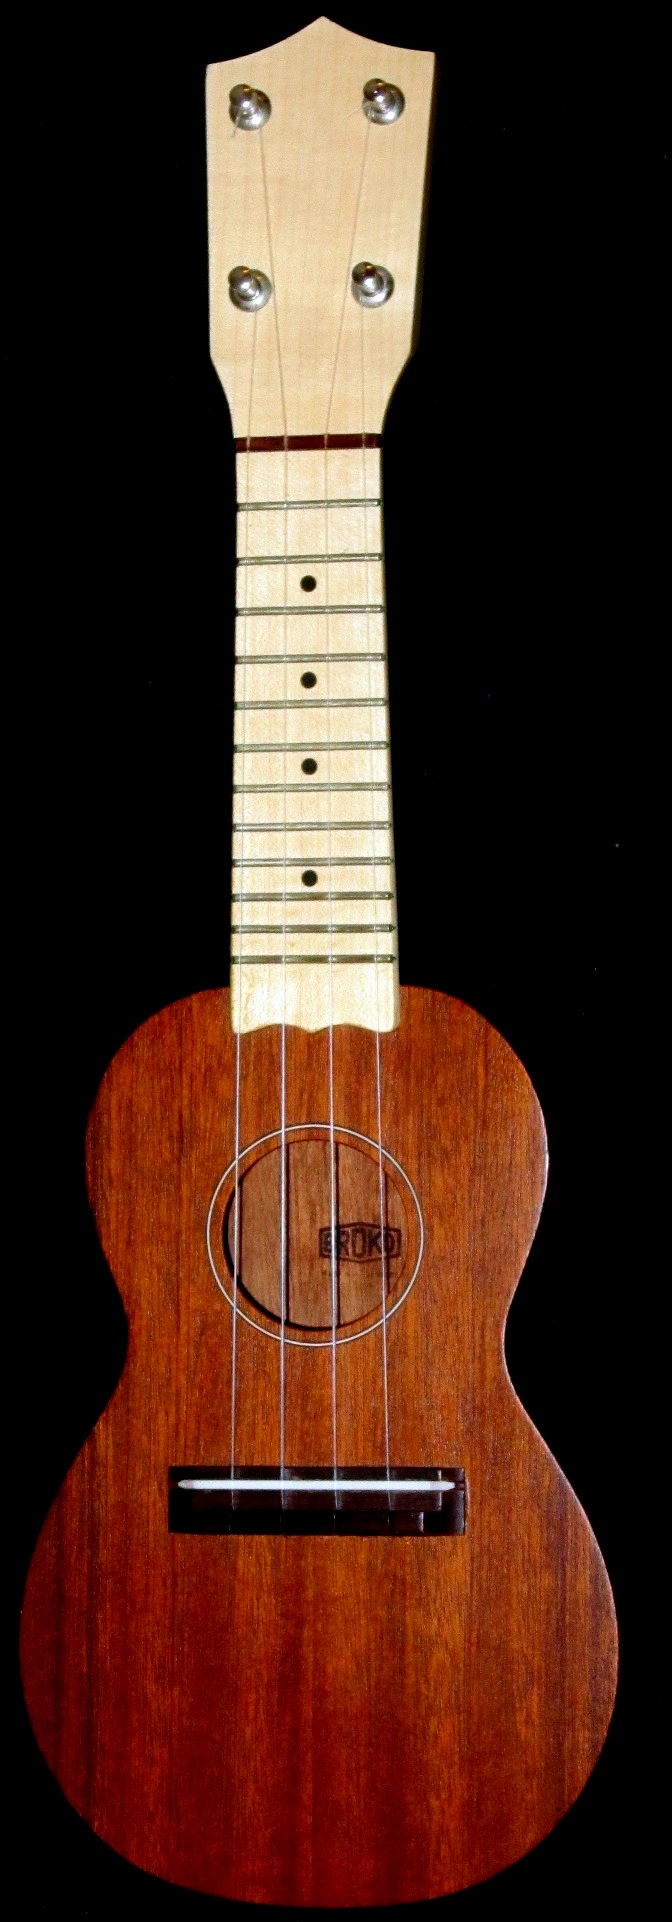 an image of a ukulele with strings that are wood